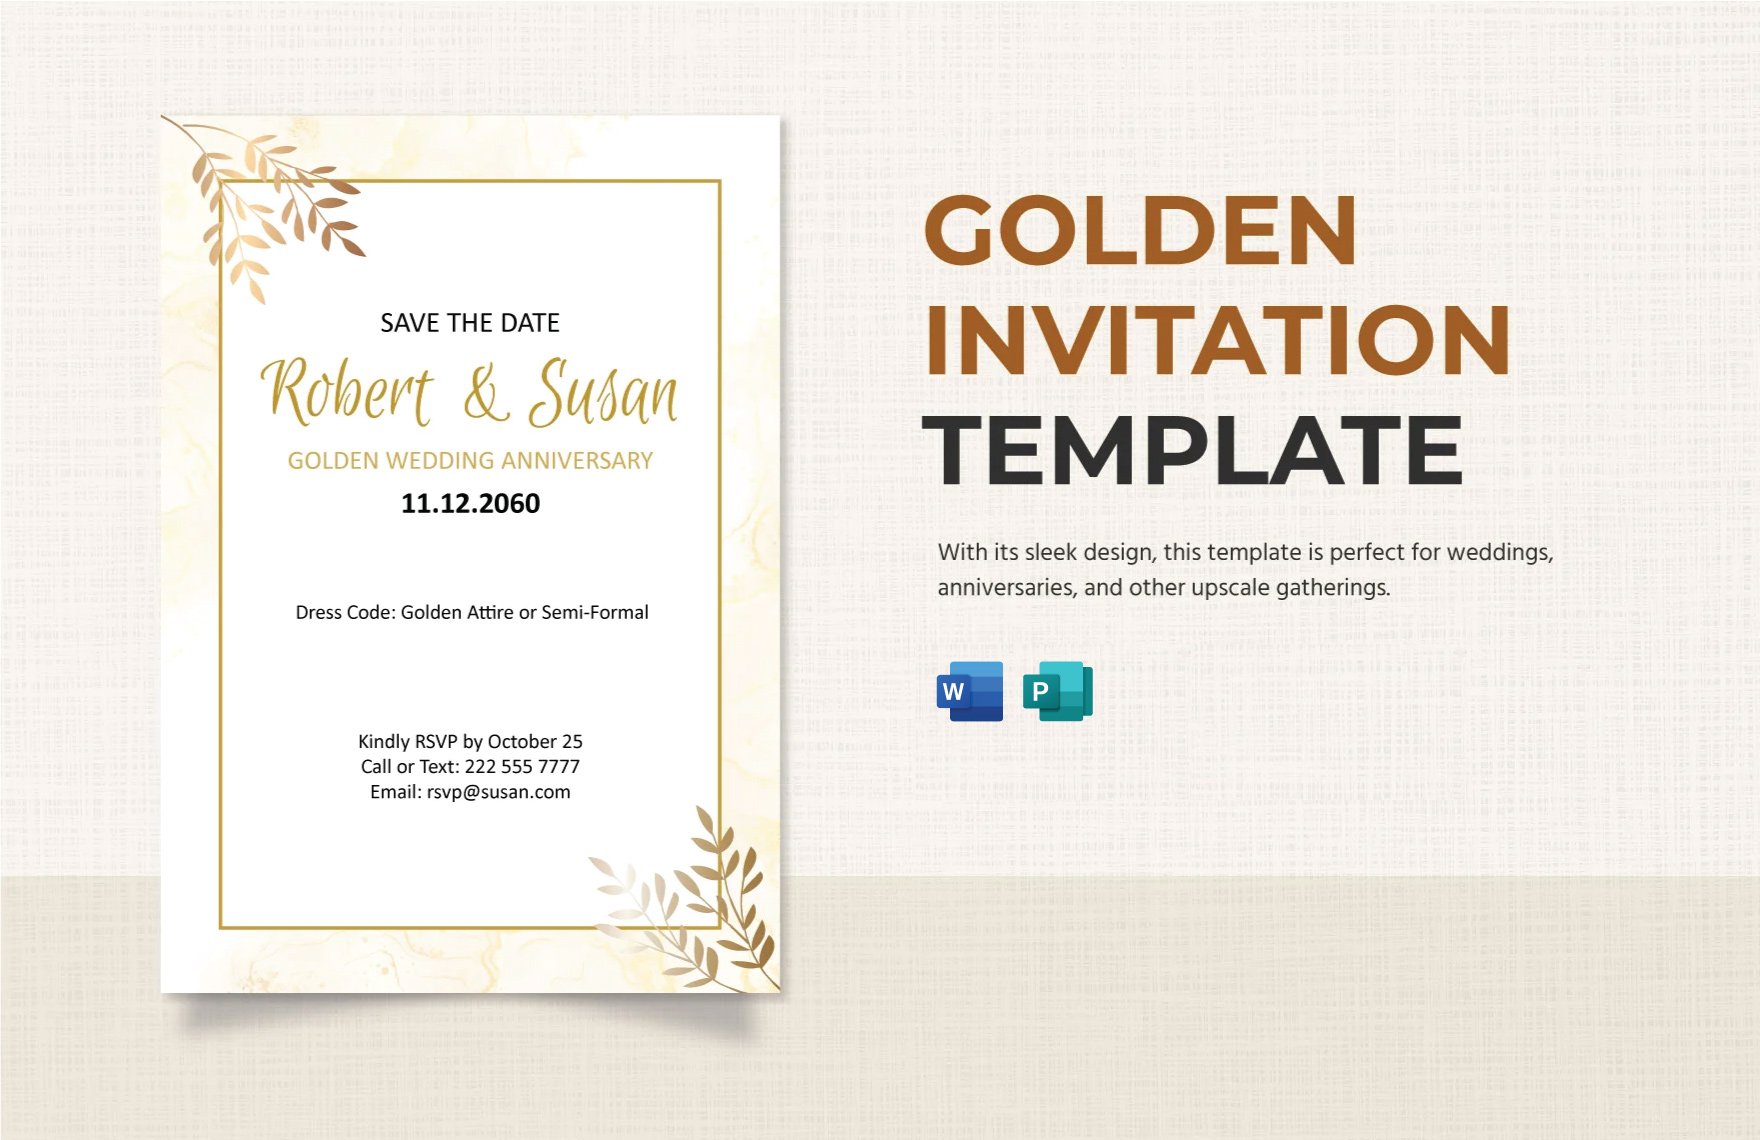 Golden Invitation Template in Word, Publisher